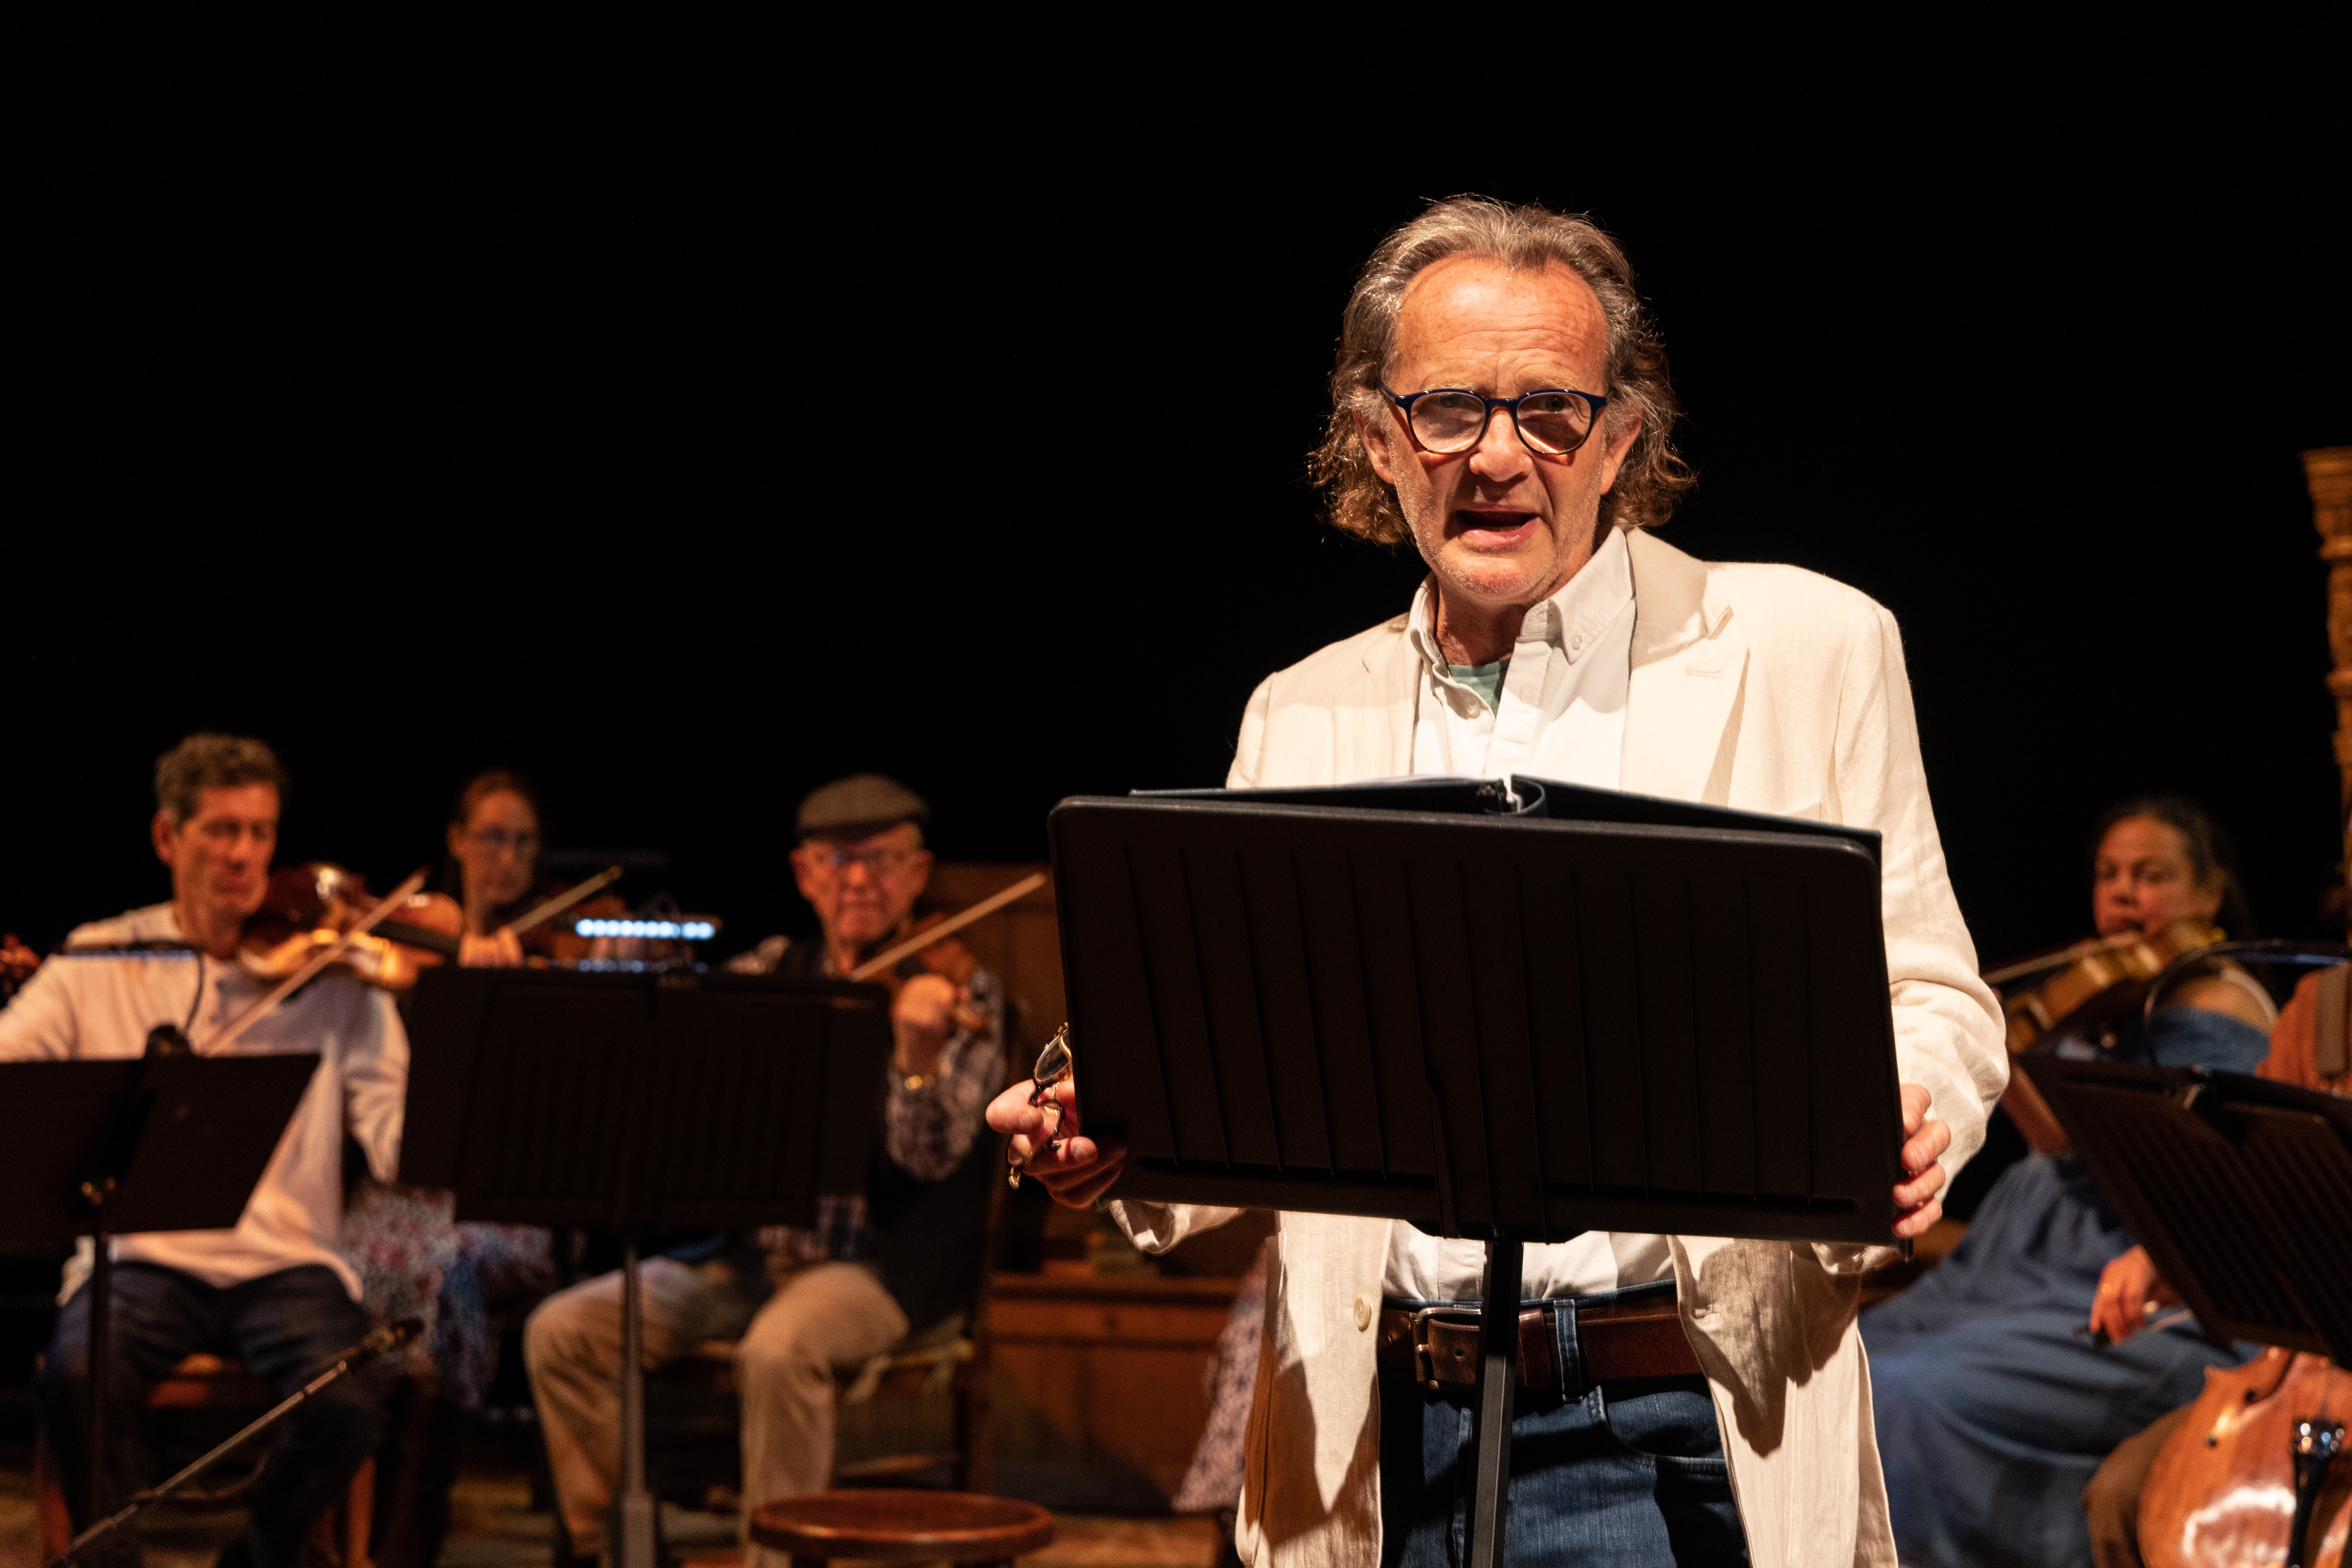 Anton Lesser stands behind a lectern, with Orchestra of the Swan playing instruments in the background